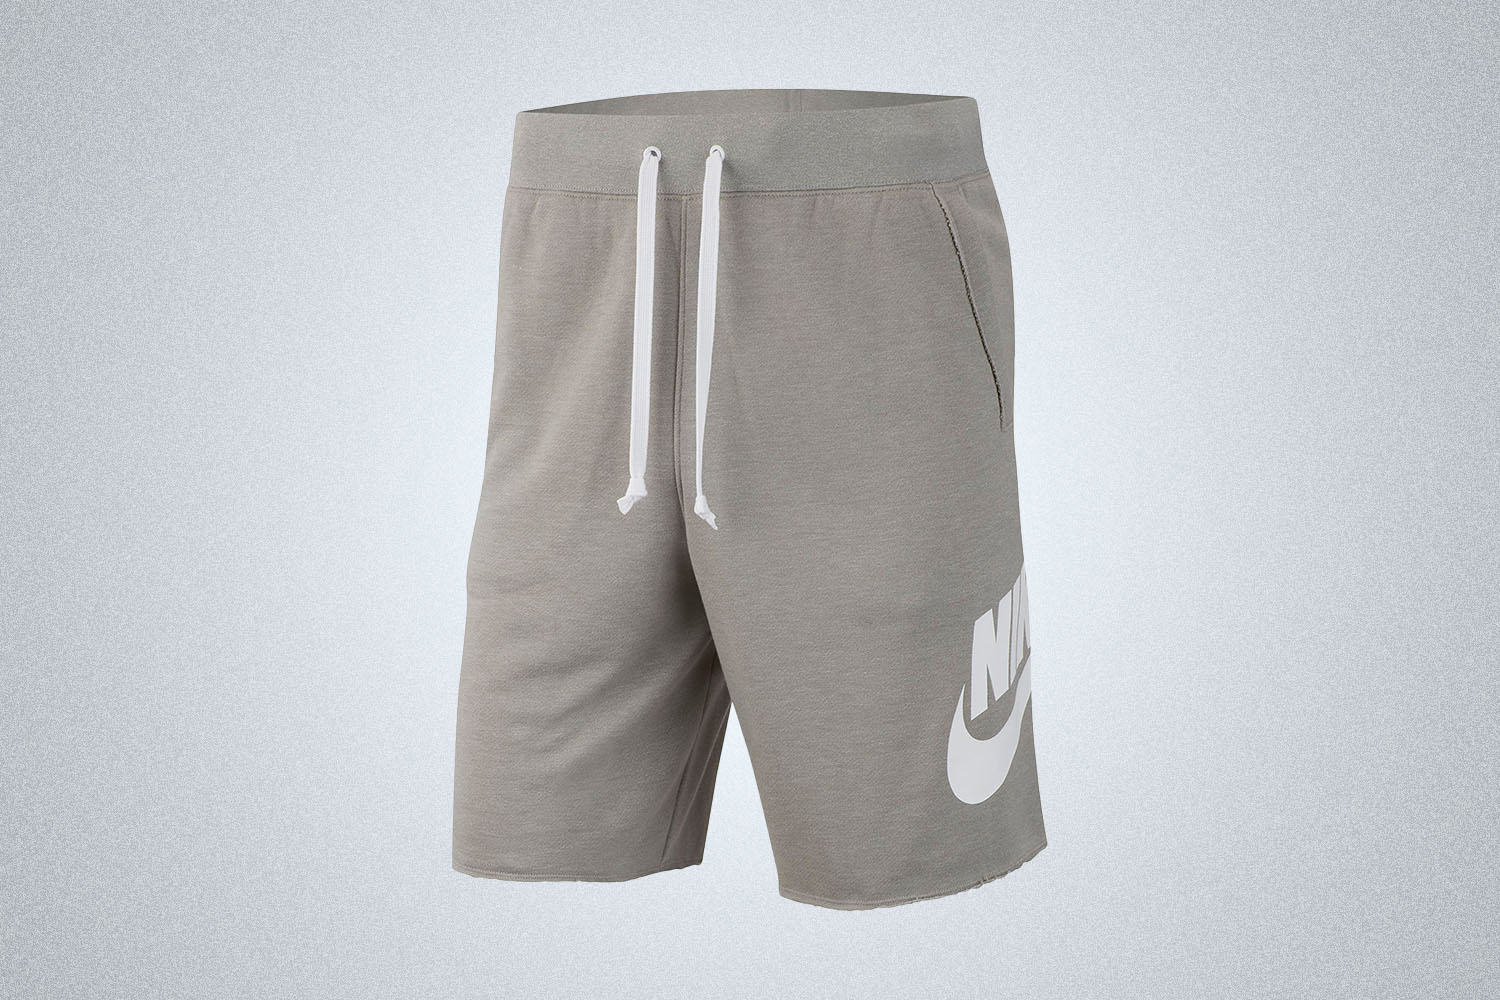 A pair of grey sweatshorts with Nike branding on a grey background